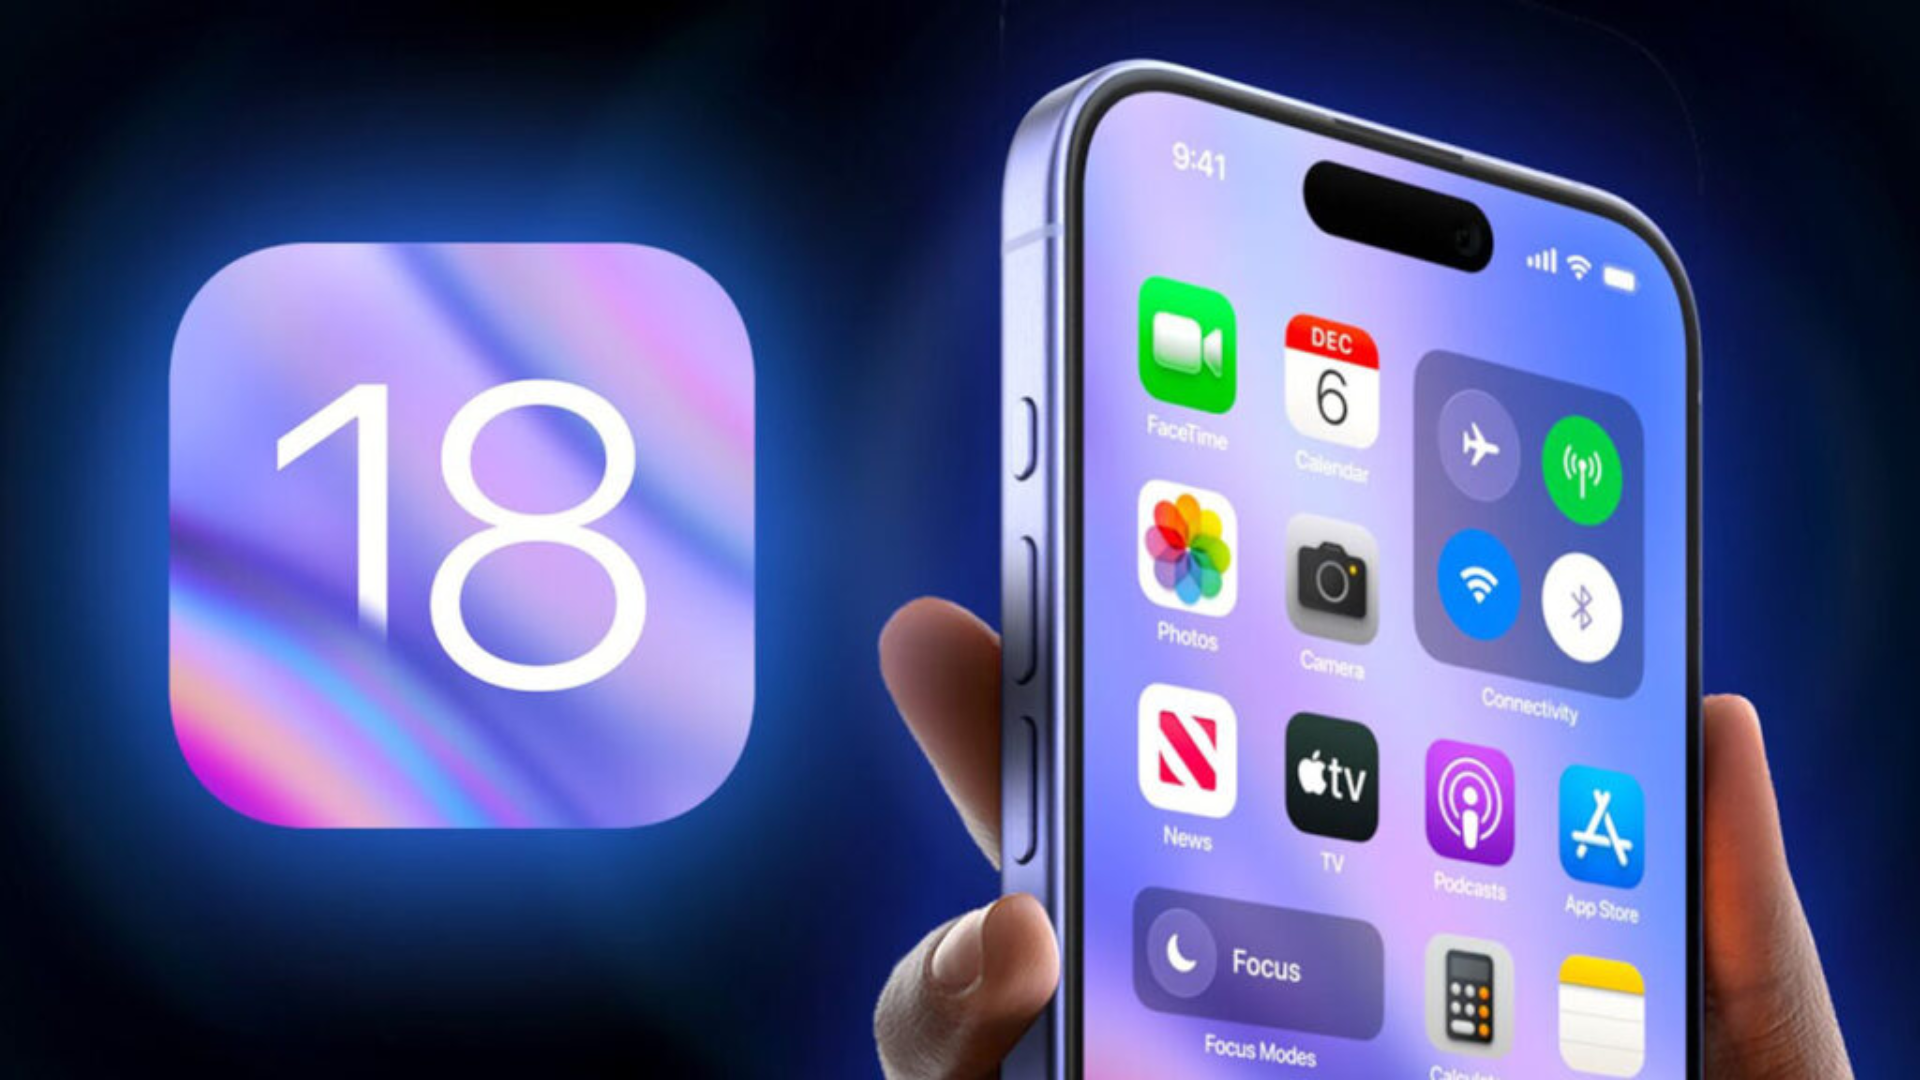 Apple's iOS 18 to Elevate Basic App Functions with AI Upgrades: Decoding the Implications